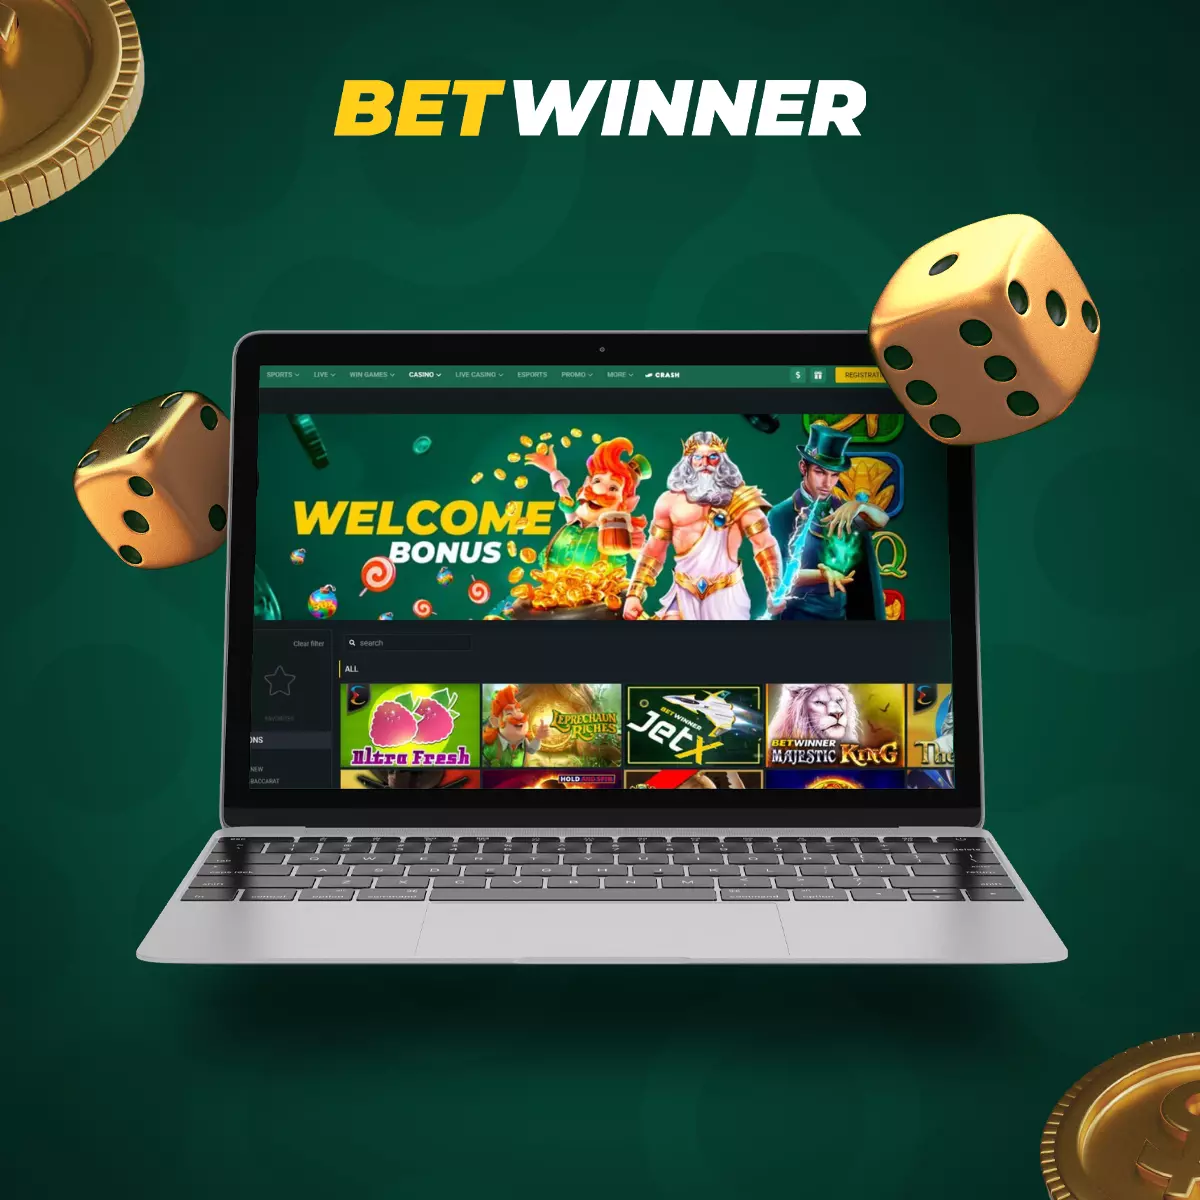 A Guide To betwinner At Any Age